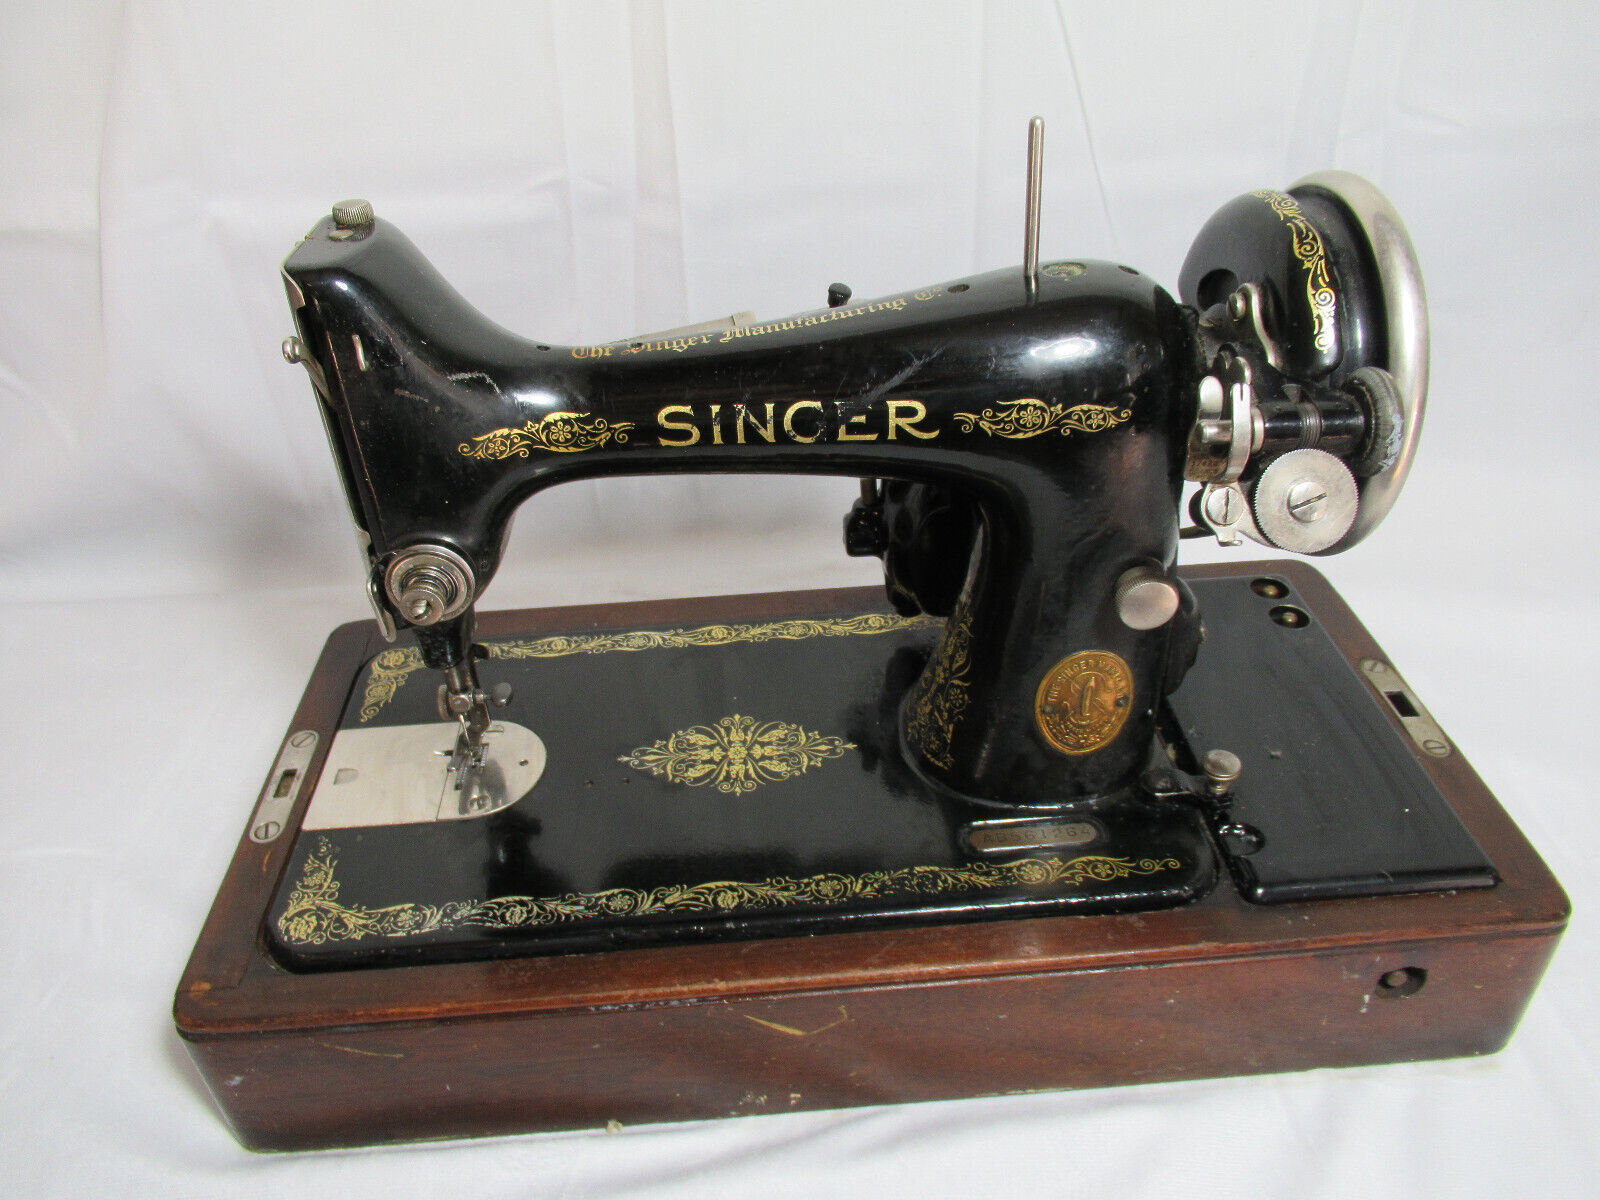 1928 Singer Sewing Machine- Compact Home Model- Excellent Working Condition